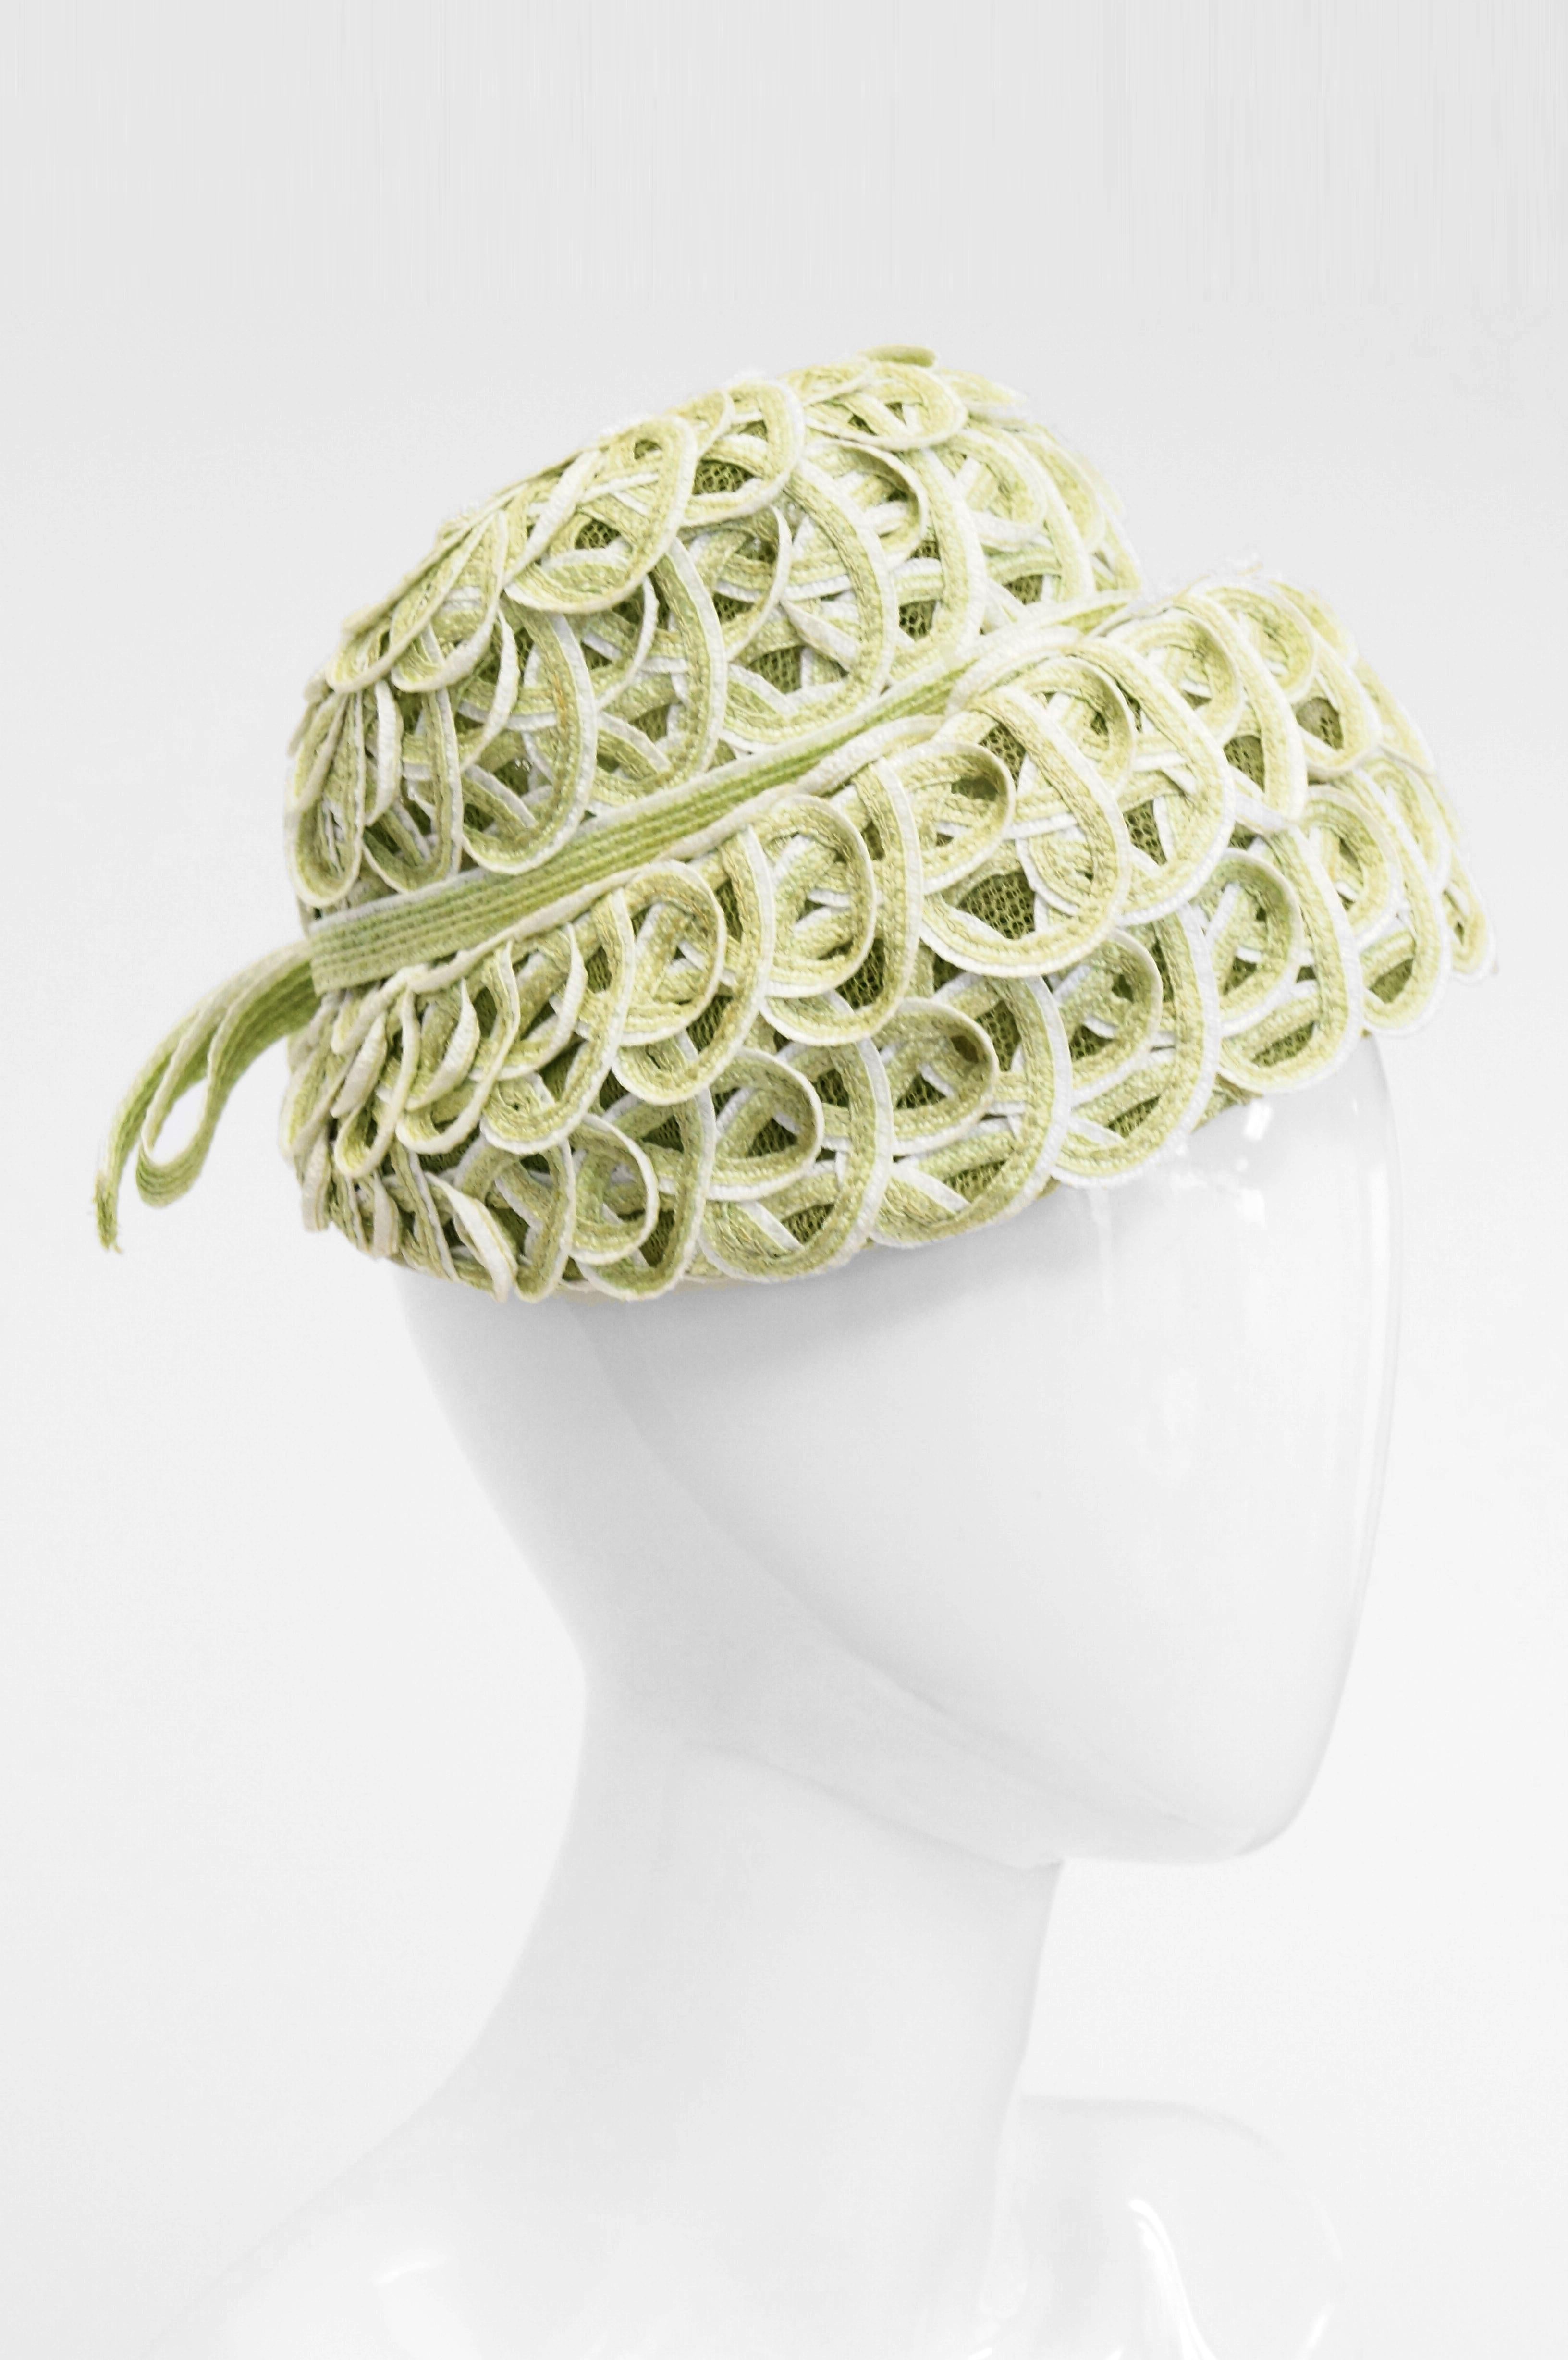 Striking and flirty comes this adorable green woven hat by Balenciaga! This bonnet - like hat is composed of ovarlapping white and green loops, and features a low, round crown, and a brim that curves downwards towards the wearer's face. The